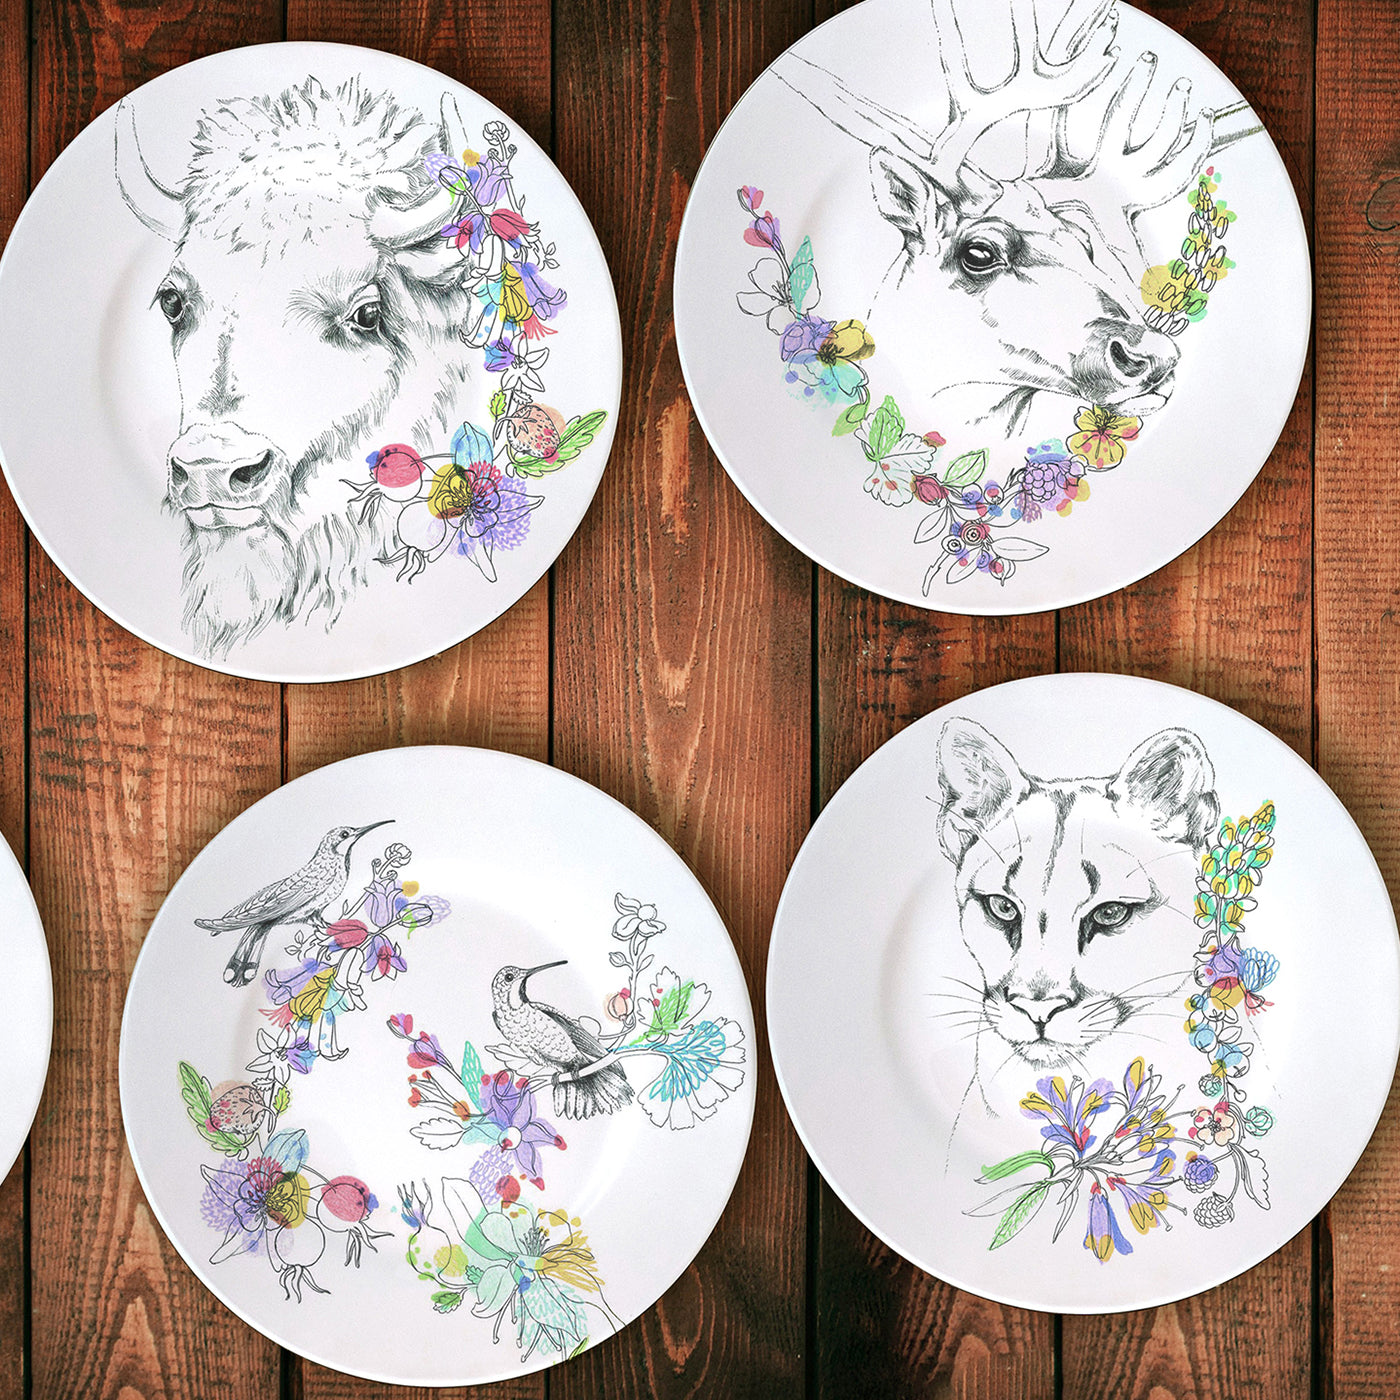 An Ode To The Woods Bison Dinner Plate - Alternative view 2